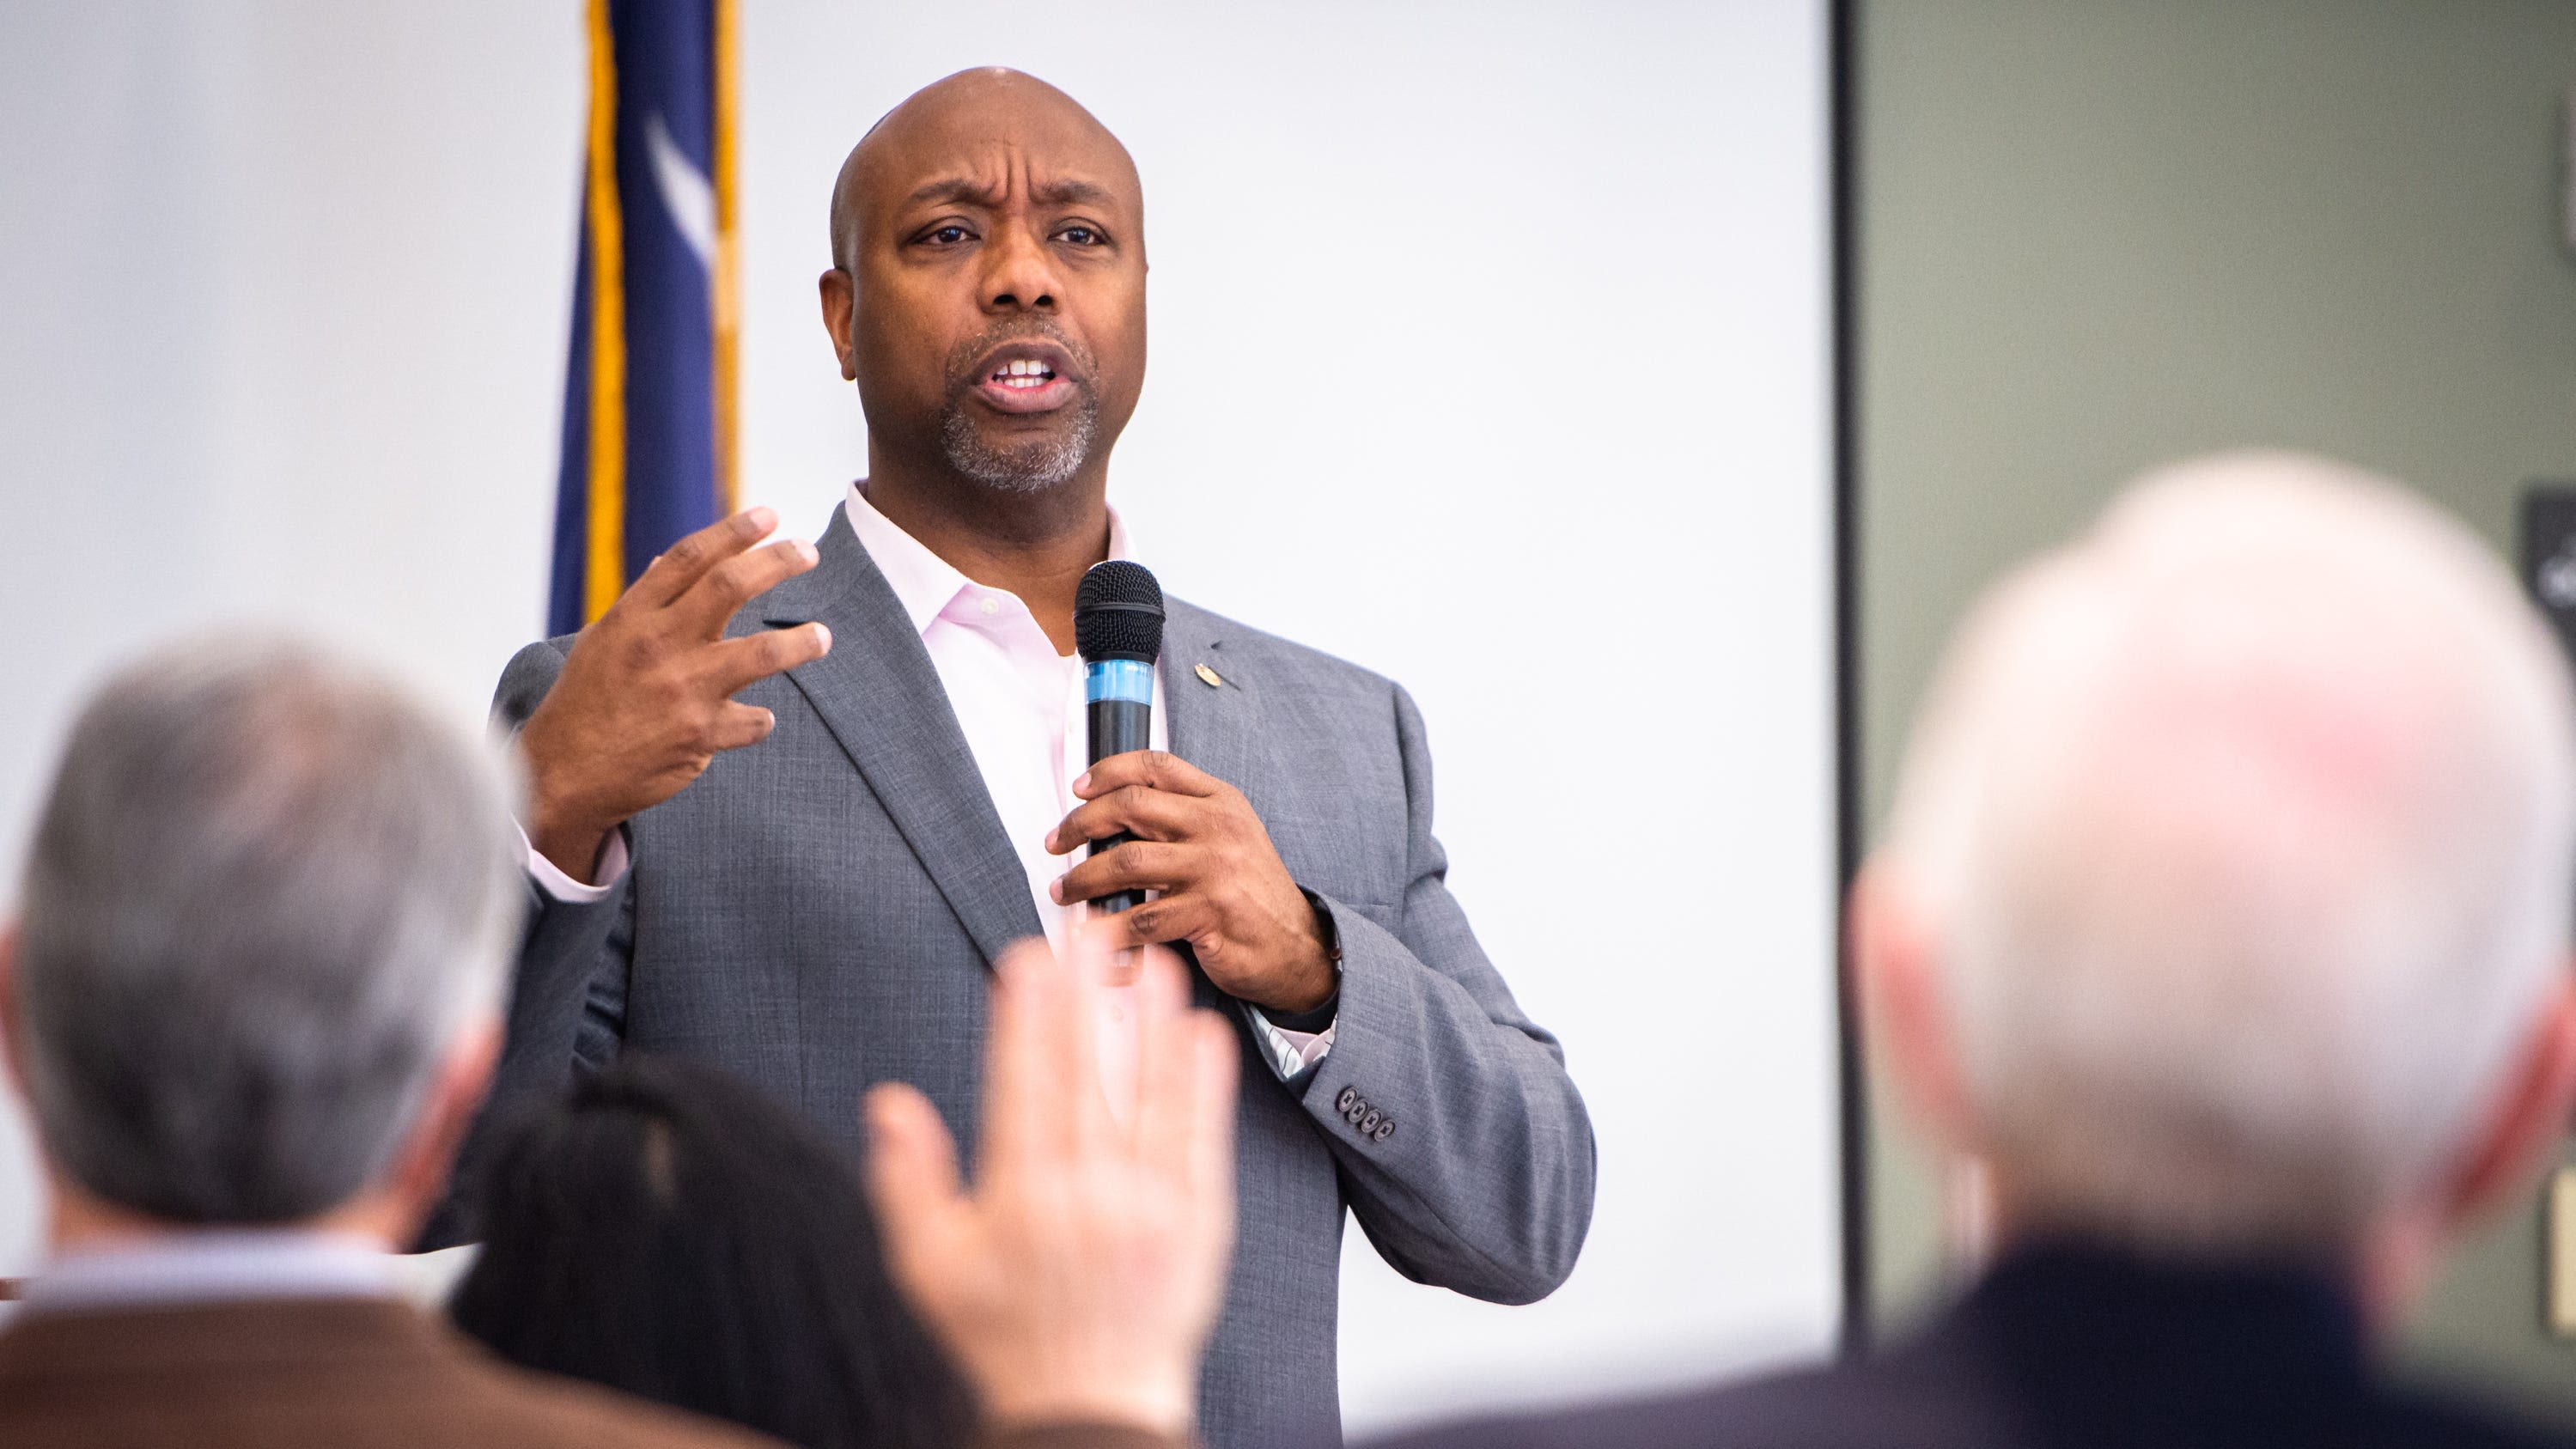 Sen. Tim Scott to be married in South Carolina this weekend, what we know so far